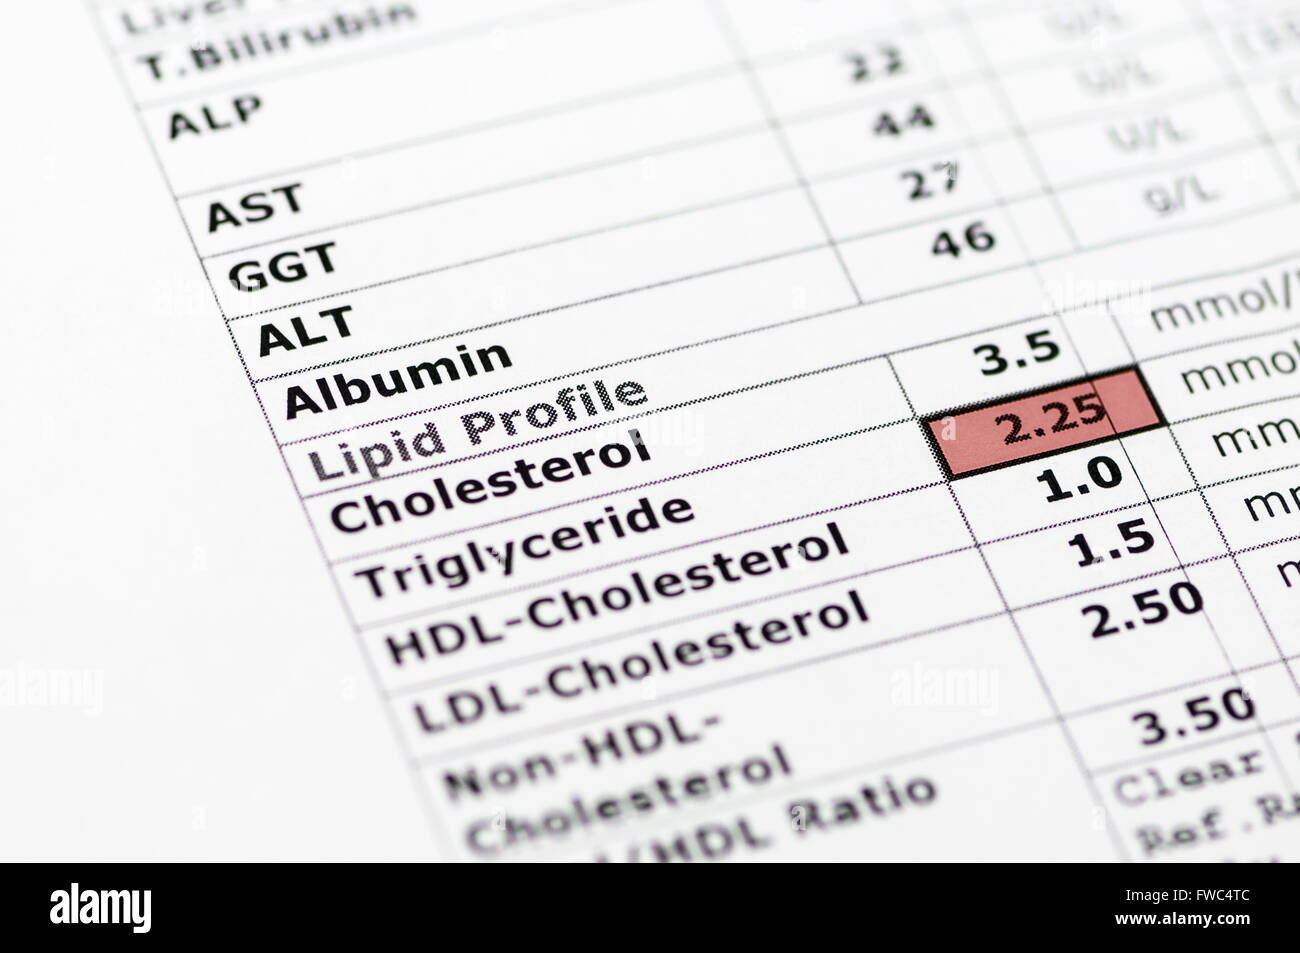 Blood chemistry report showing normal liver function tests, and a lipid profile with high triglyceride levels. Stock Photo